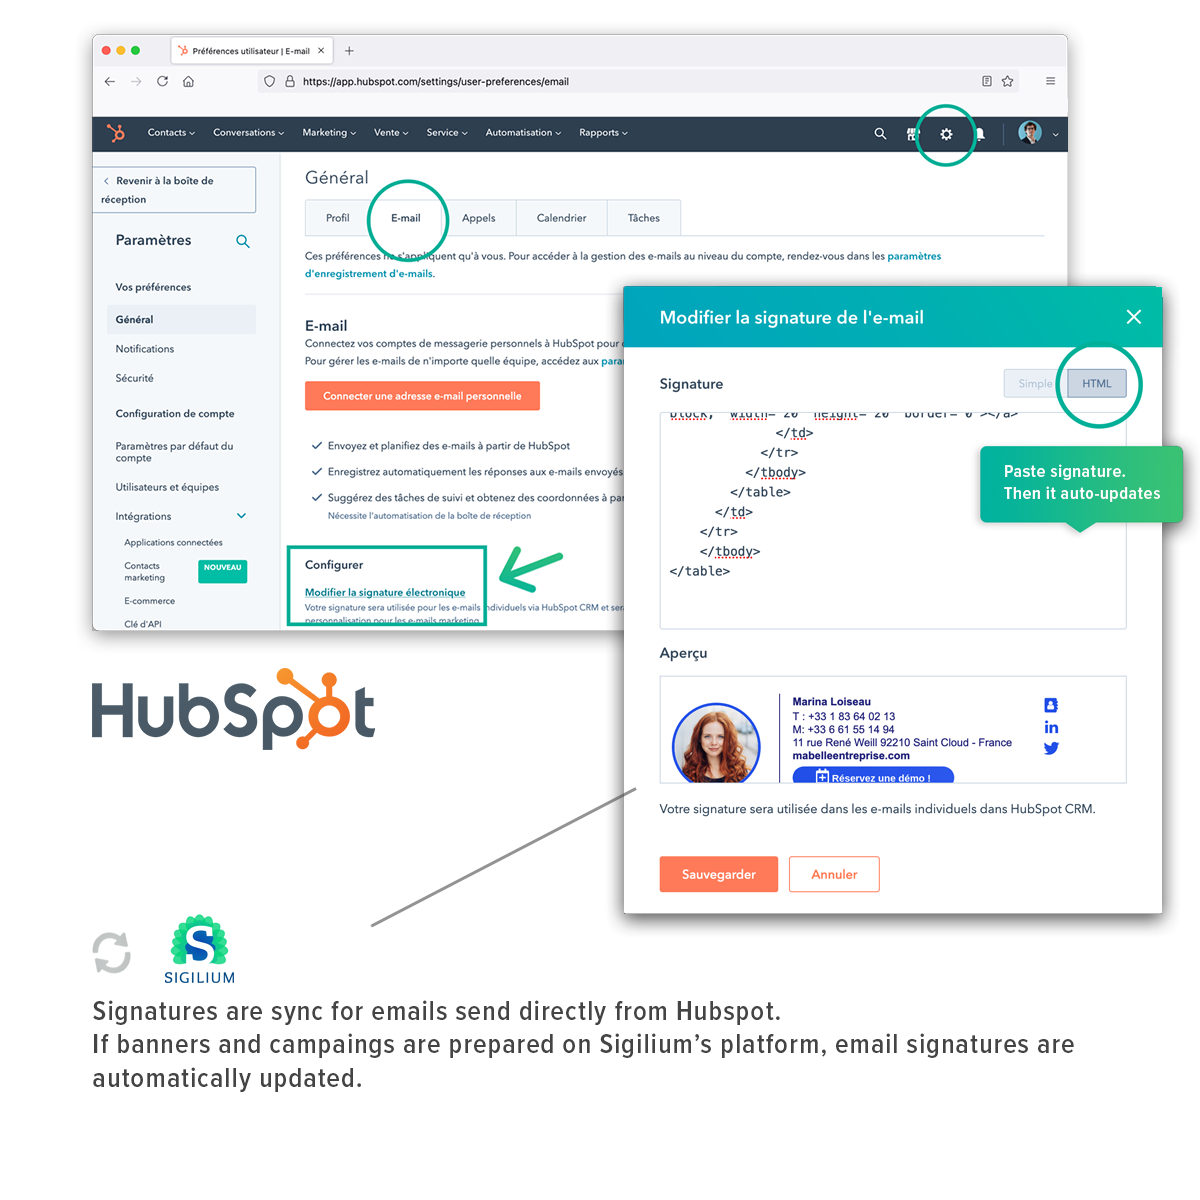 Emails send from Hubspot directly.